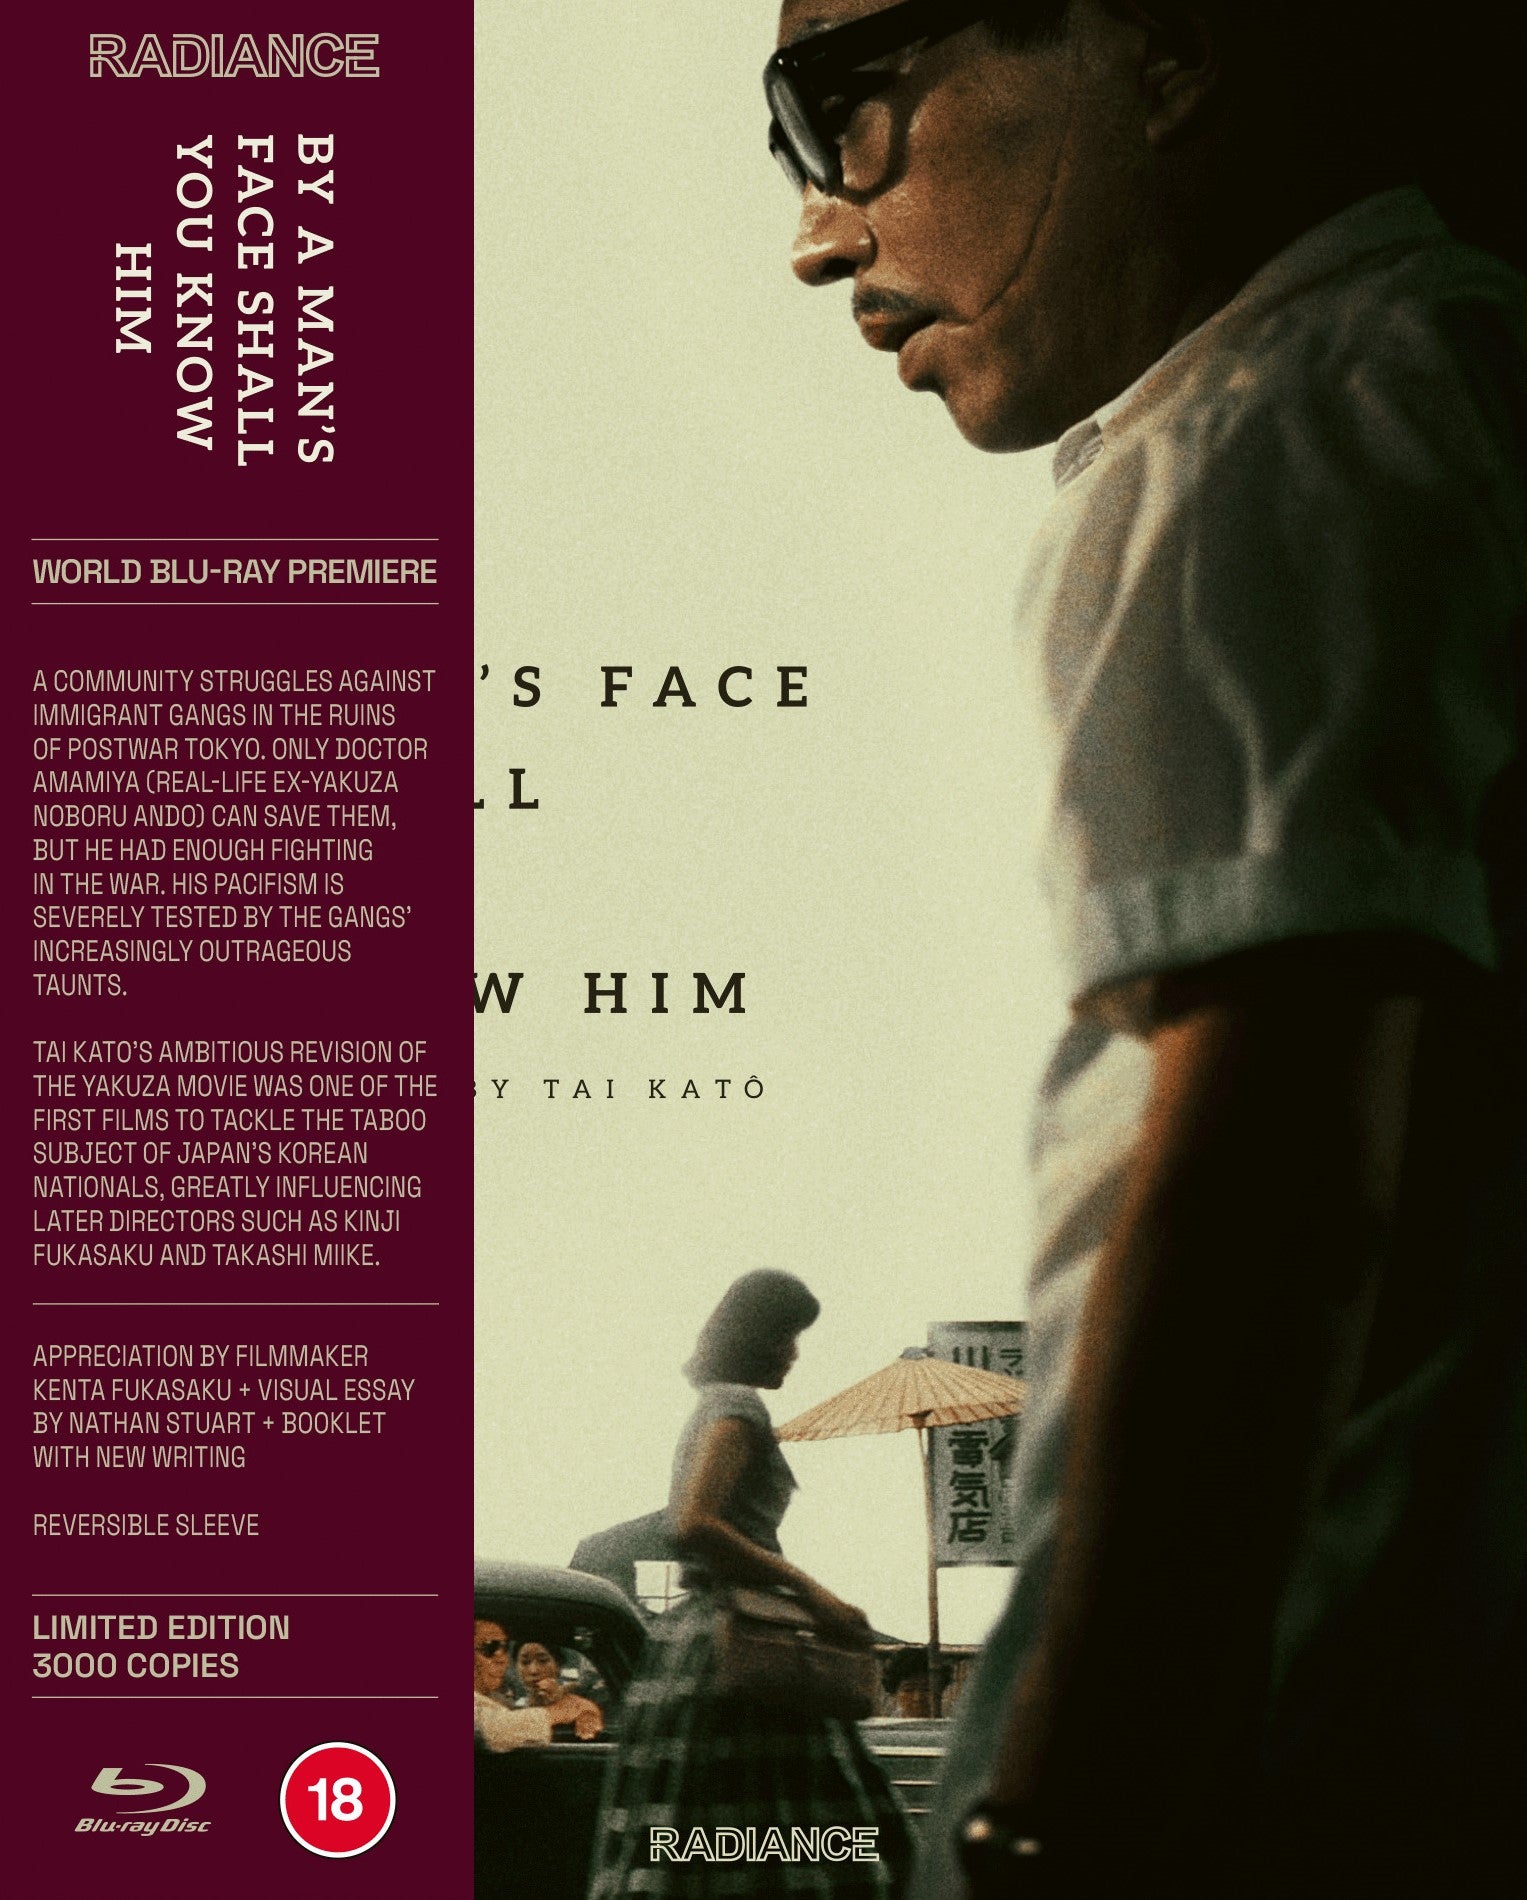 BY A MAN'S FACE SHALL YOU KNOW HIM (REGION B IMPORT - LIMITED EDITION) BLU-RAY